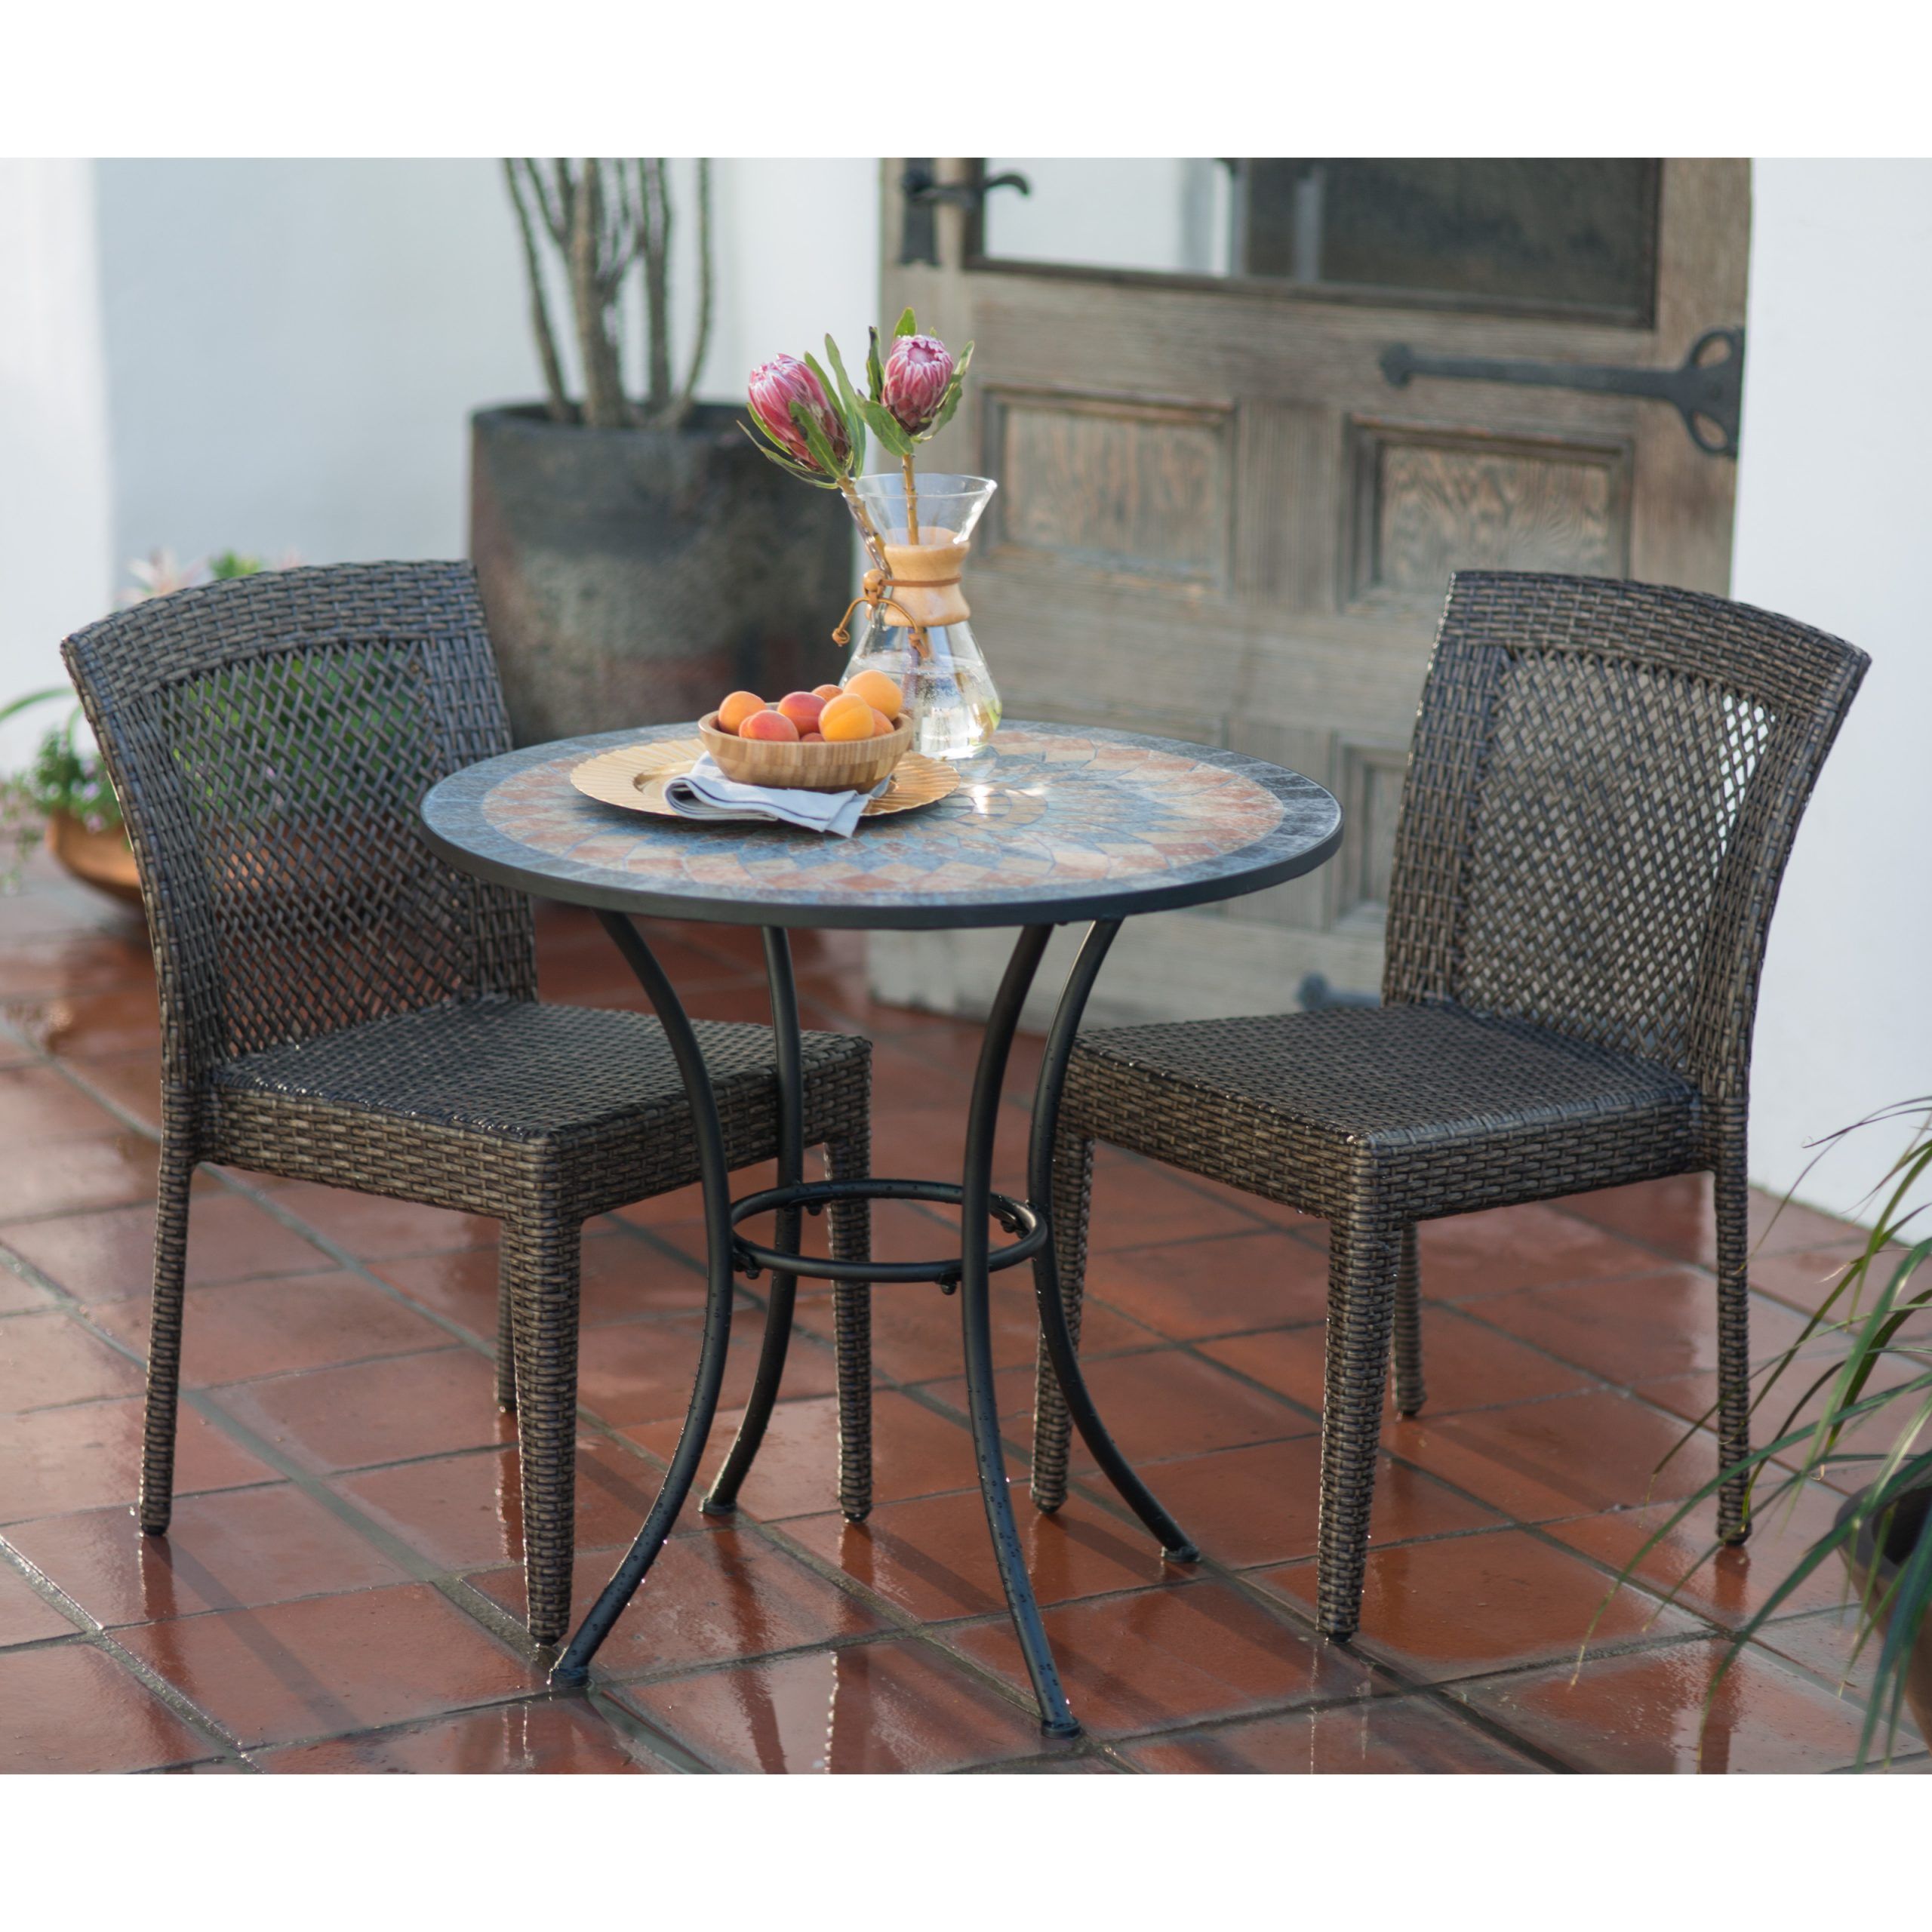 Belham Living Brisbane All Weather Wicker And Mosaic Patio Bistro Set With Regard To Outdoor Wicker Cafe Dining Sets (View 8 of 15)